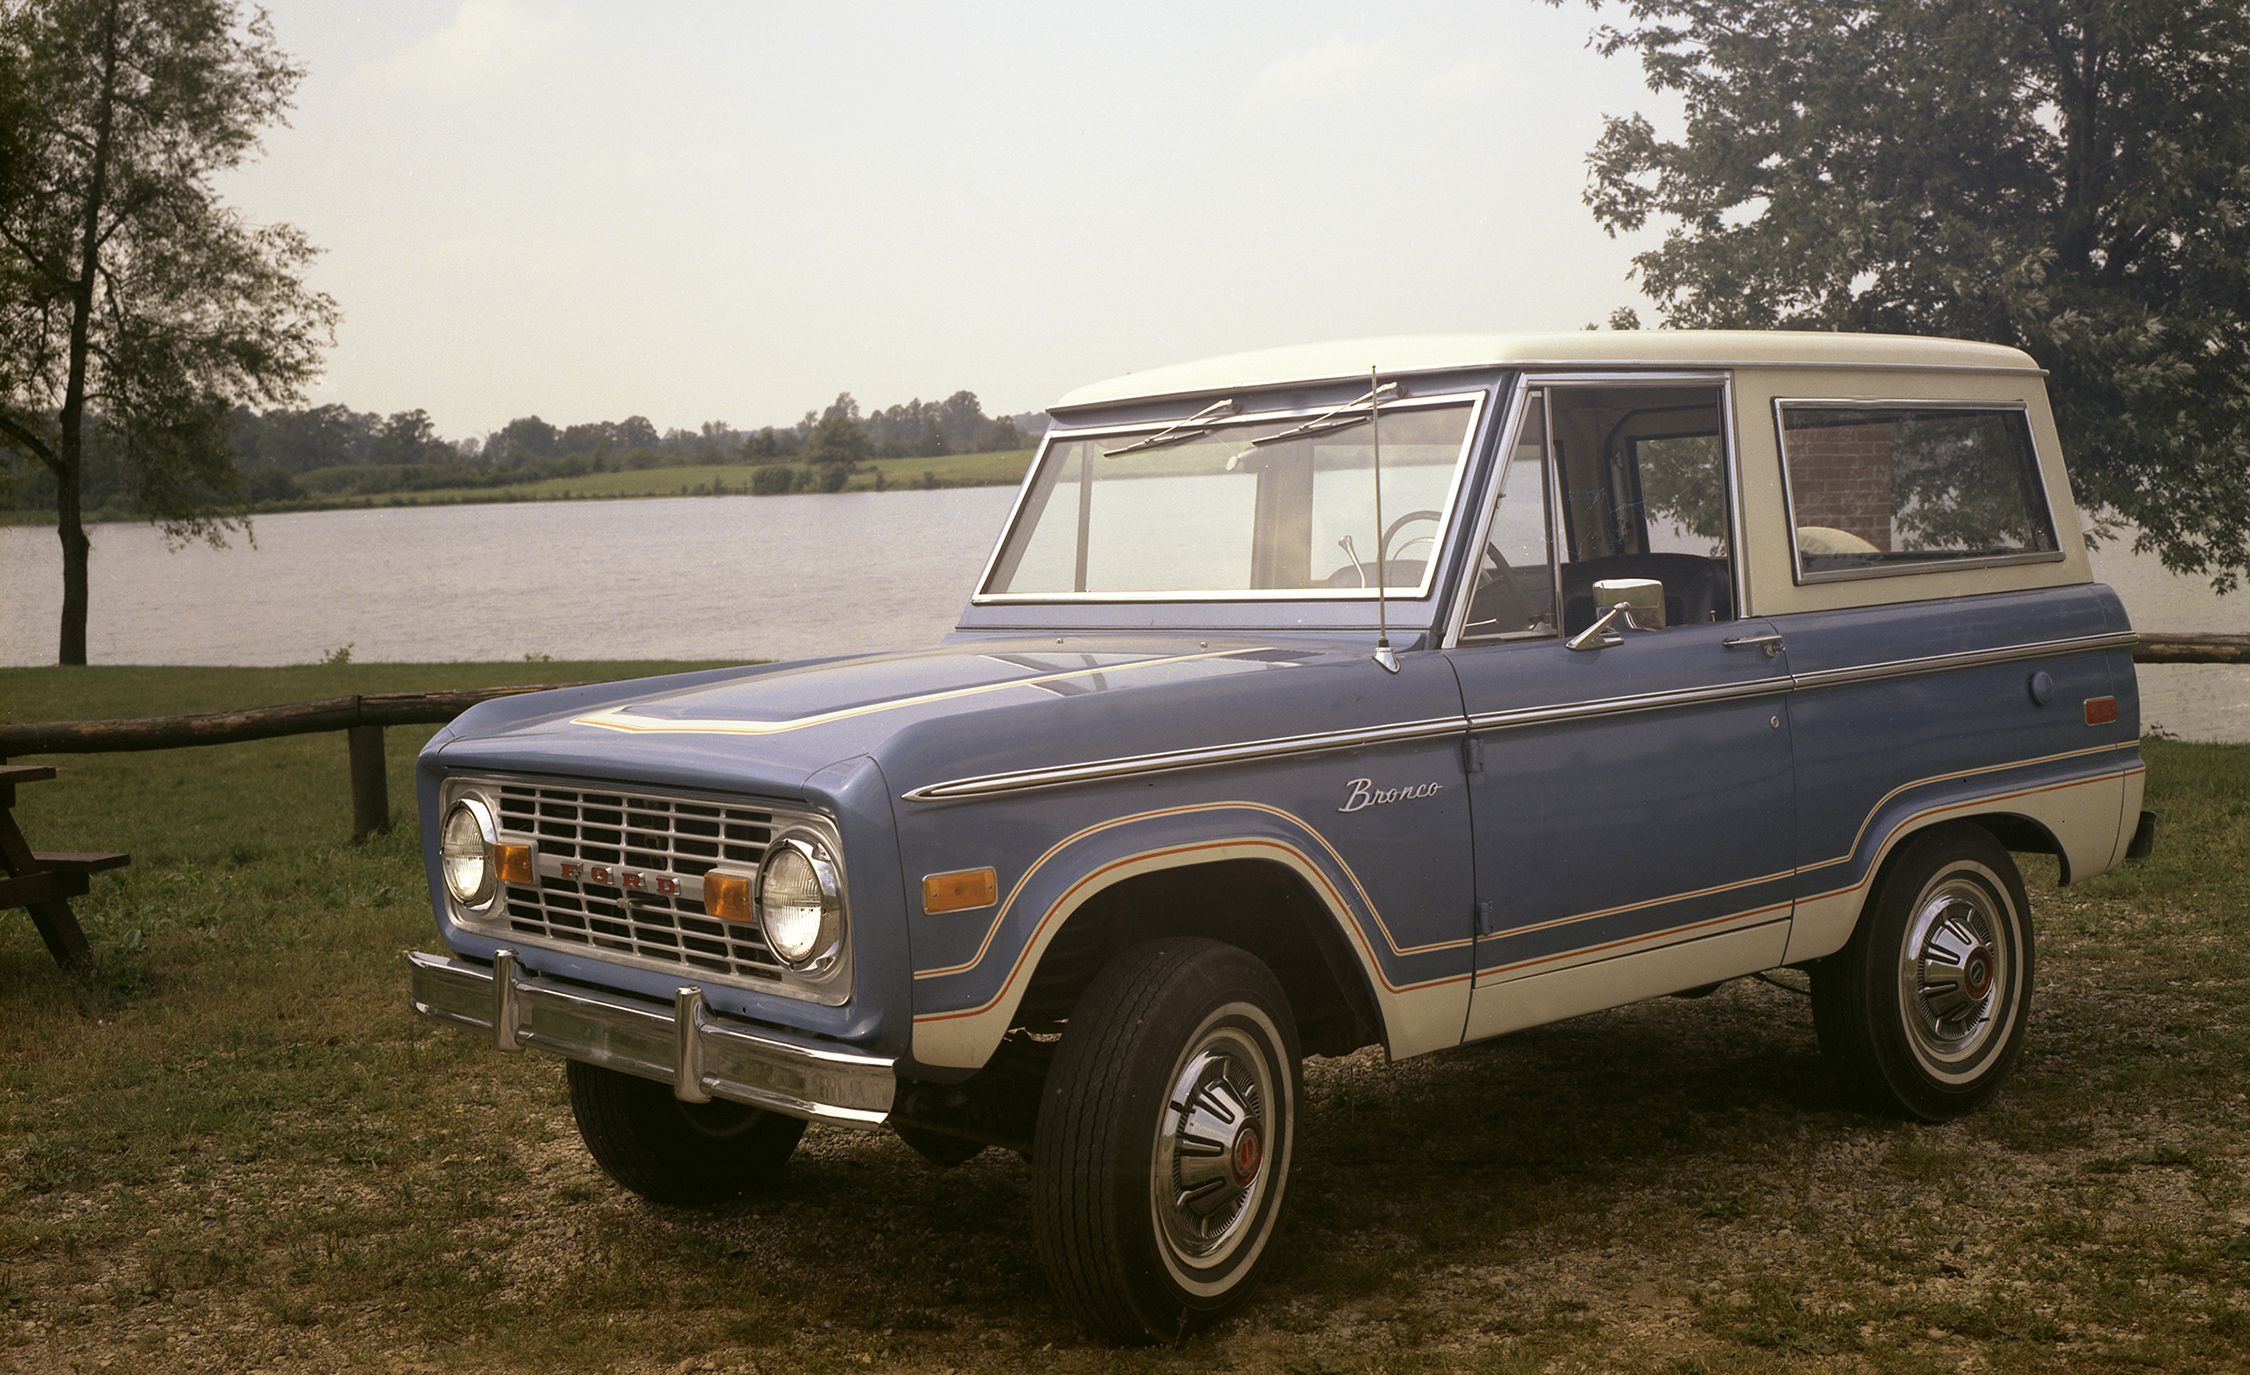 Ford Bronco History Chart